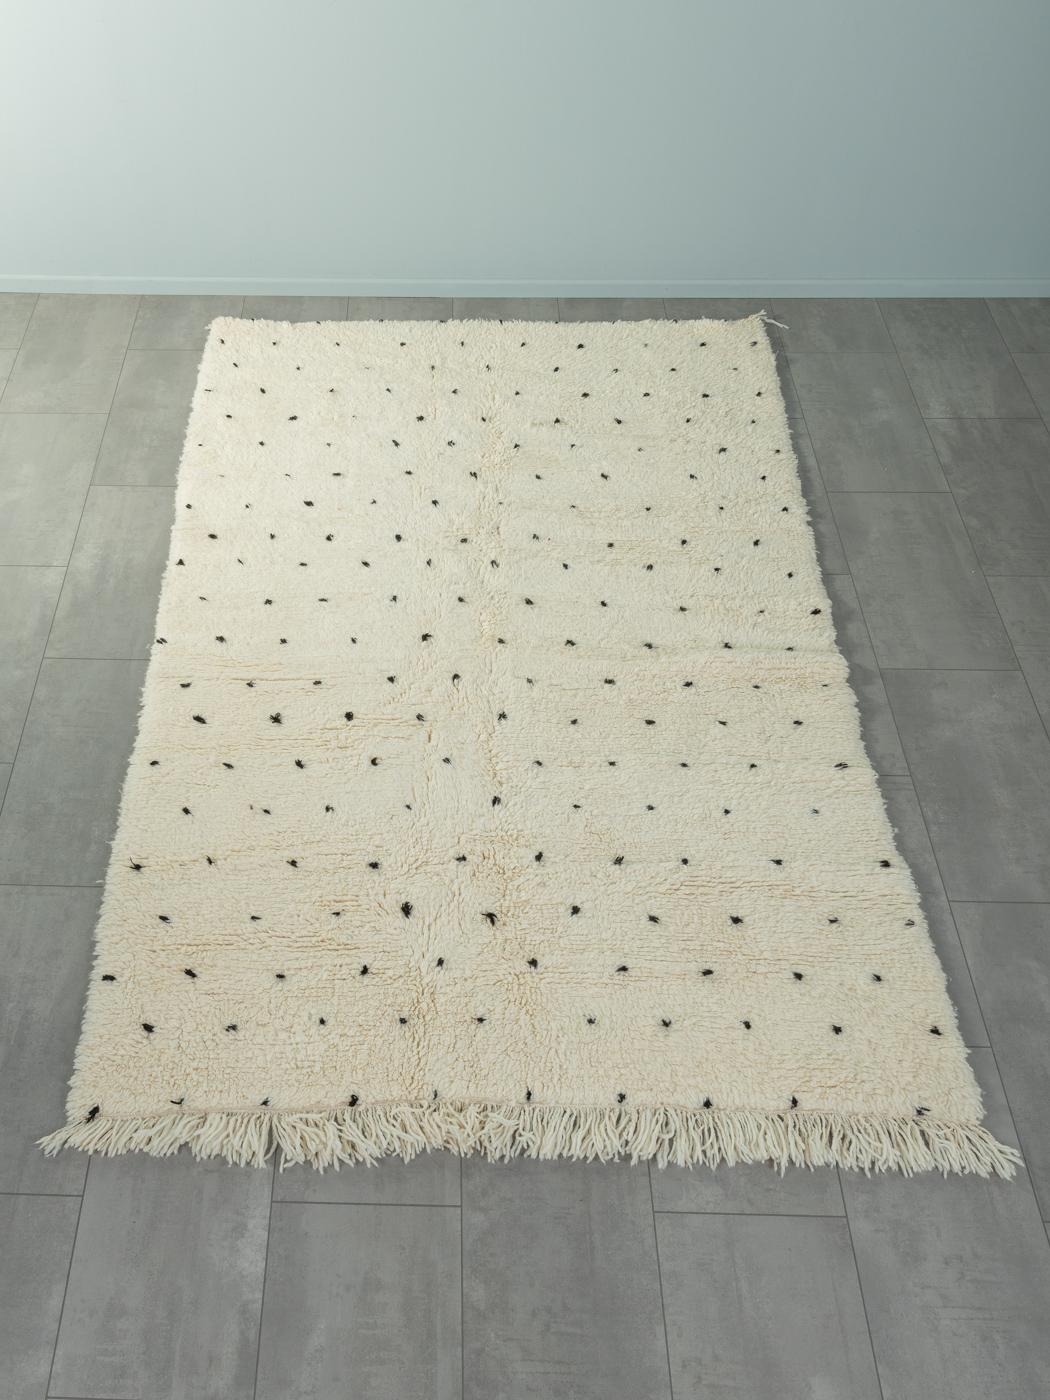 Dalmatian II is a contemporary 100% wool rug – thick and soft, comfortable underfoot. Our Berber rugs are handwoven and handknotted by Amazigh women in the Atlas Mountains. These communities have been crafting rugs for thousands of years. One knot